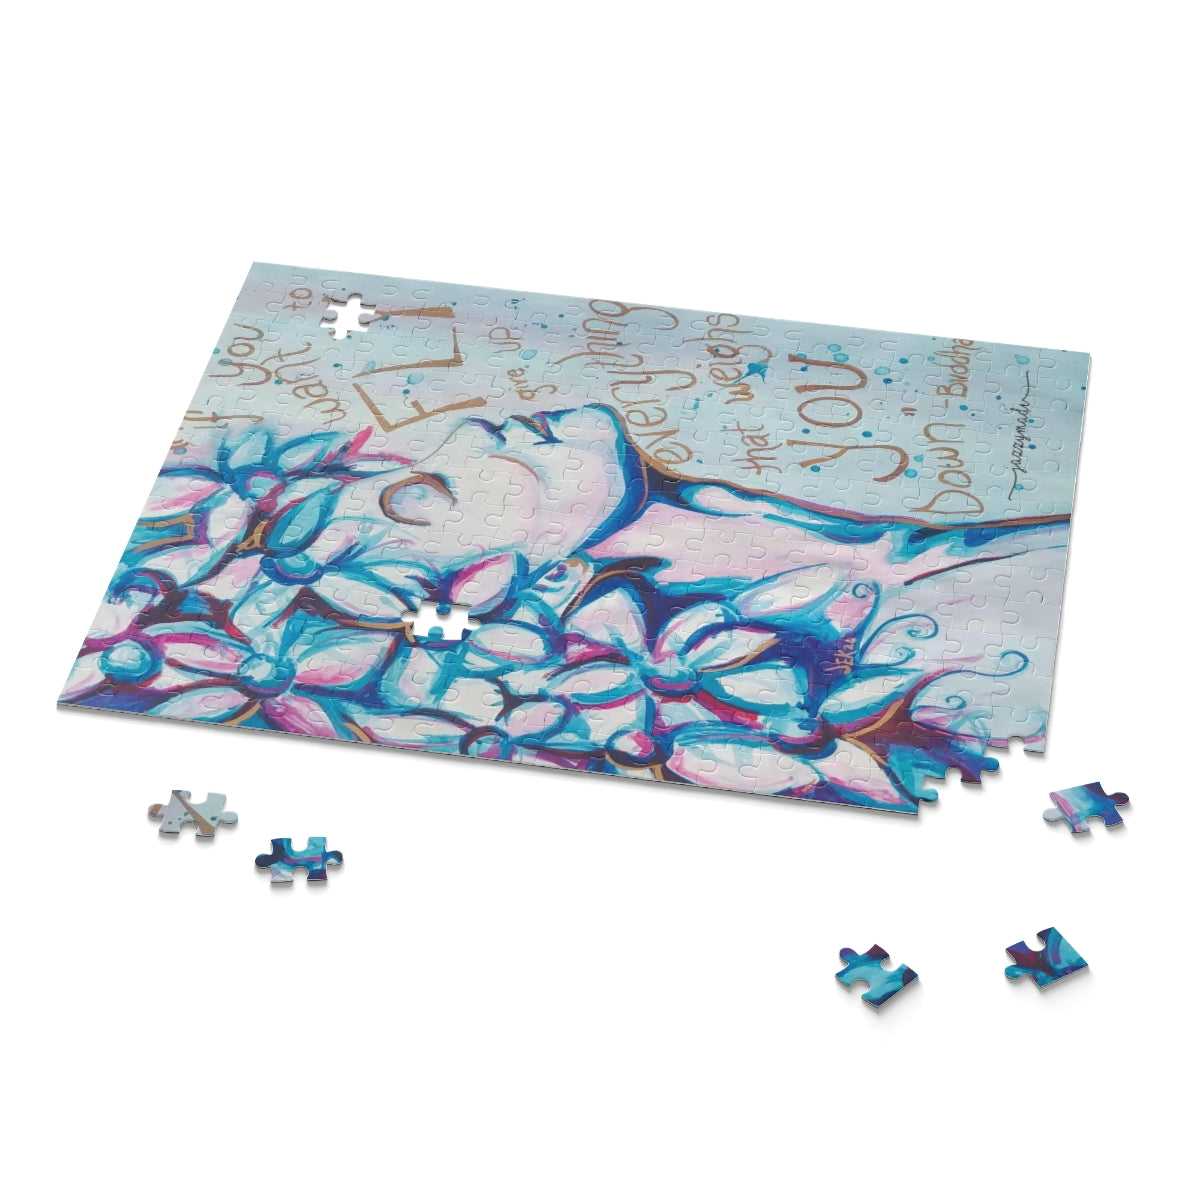 "Weightless" Puzzle